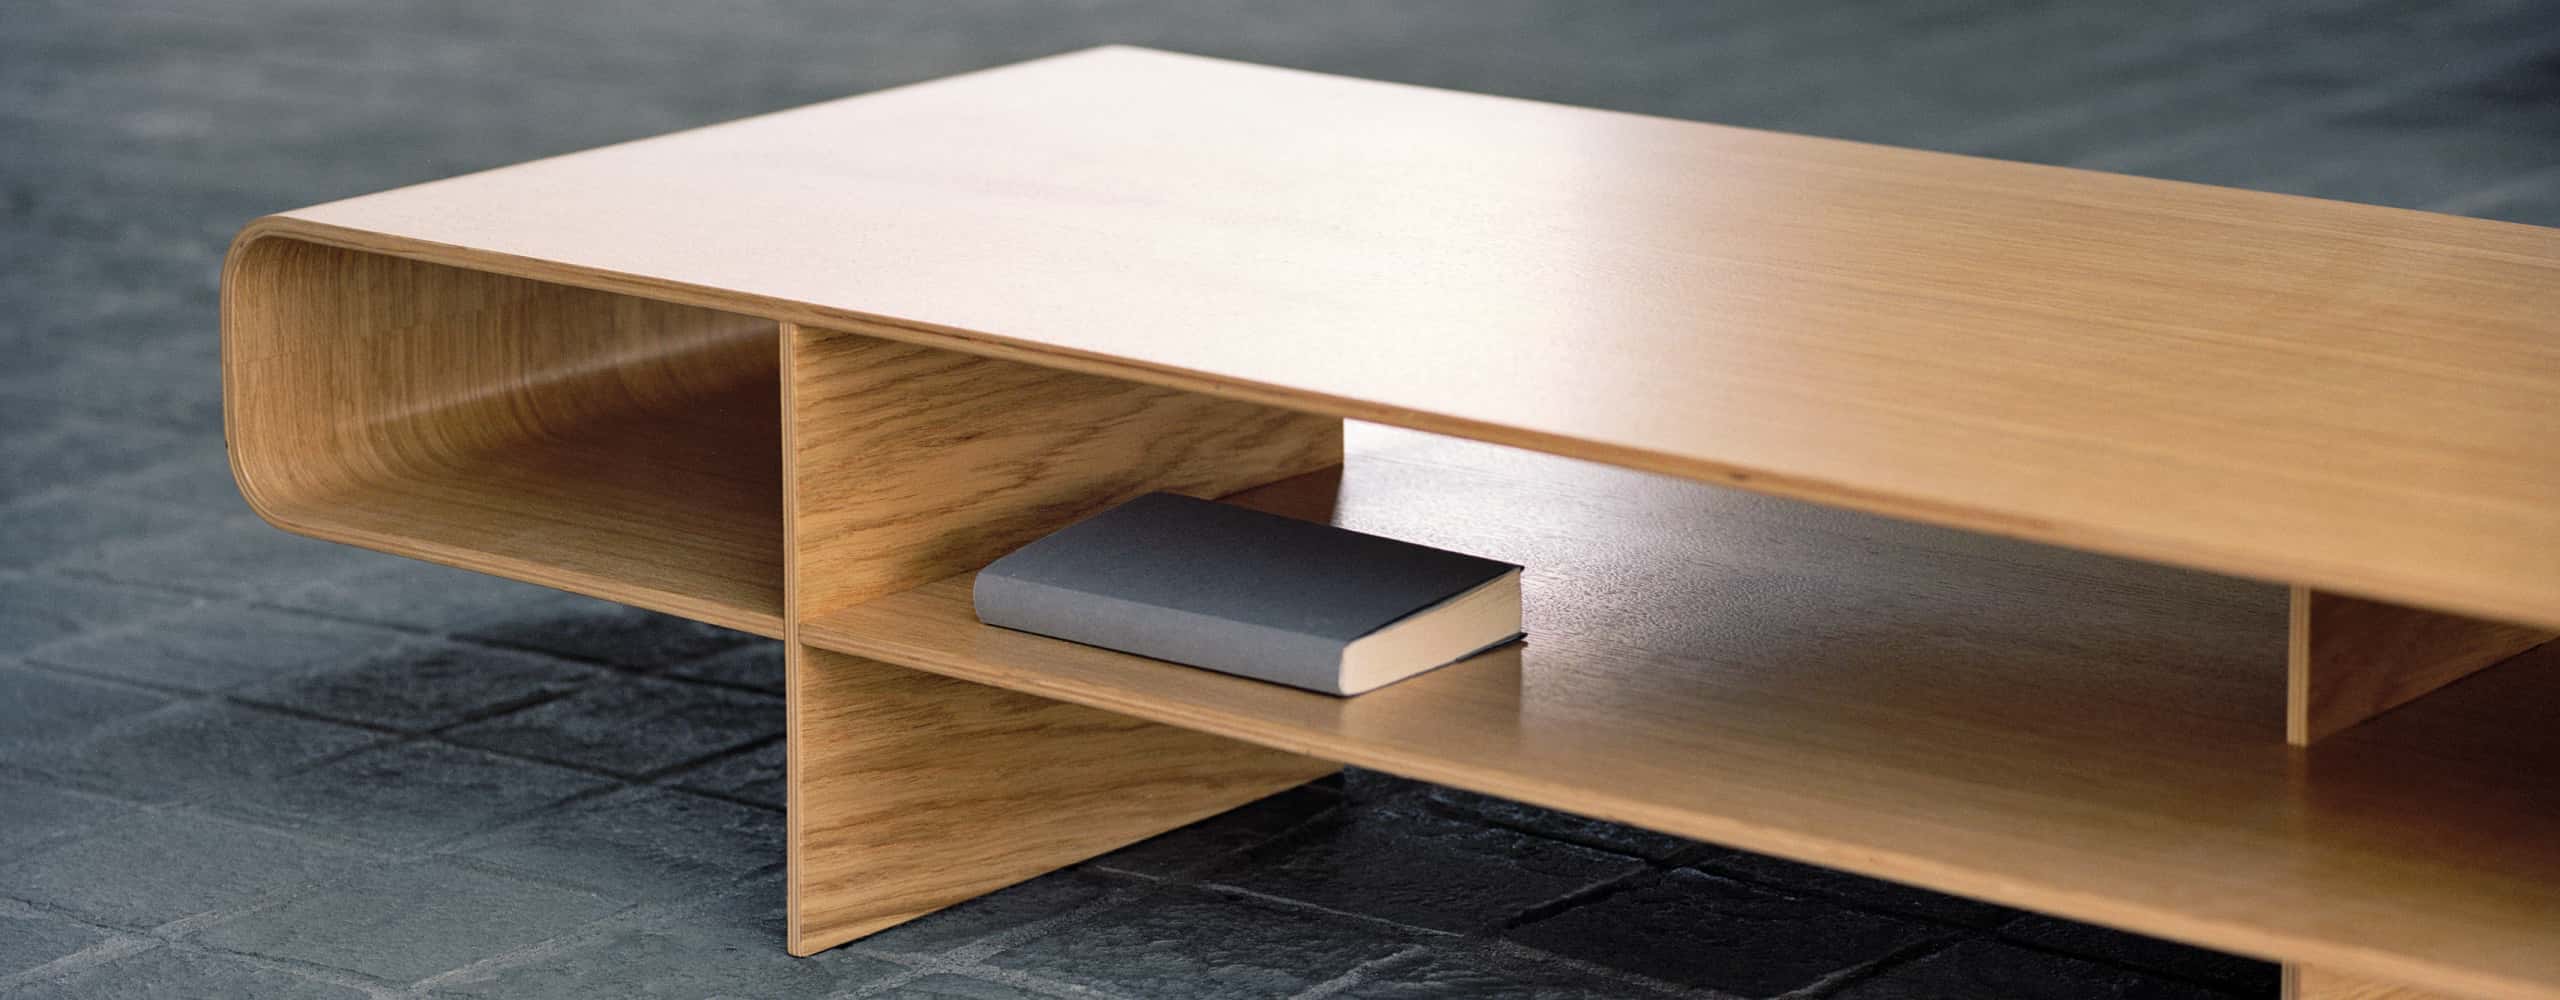 https://www.millharbour.co.uk/wp-content/uploads/2020/08/Mill-Harbour-Barber-Osgerby-Coffee-Table.jpg